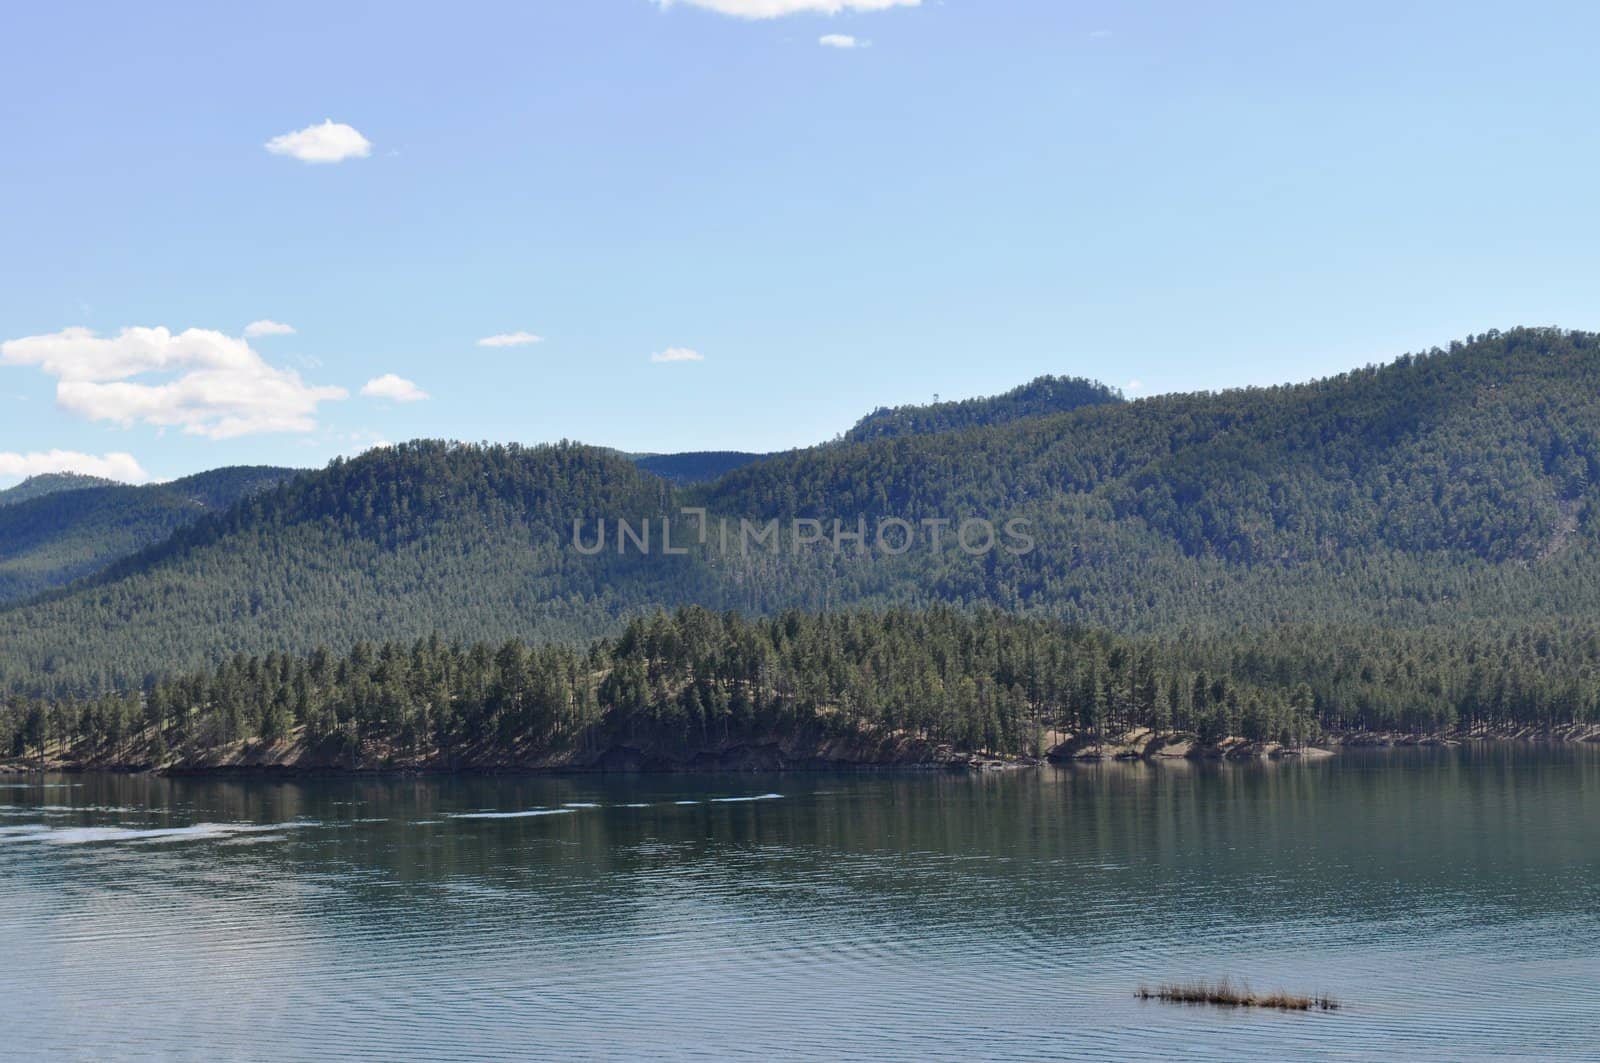 Black hills and water background